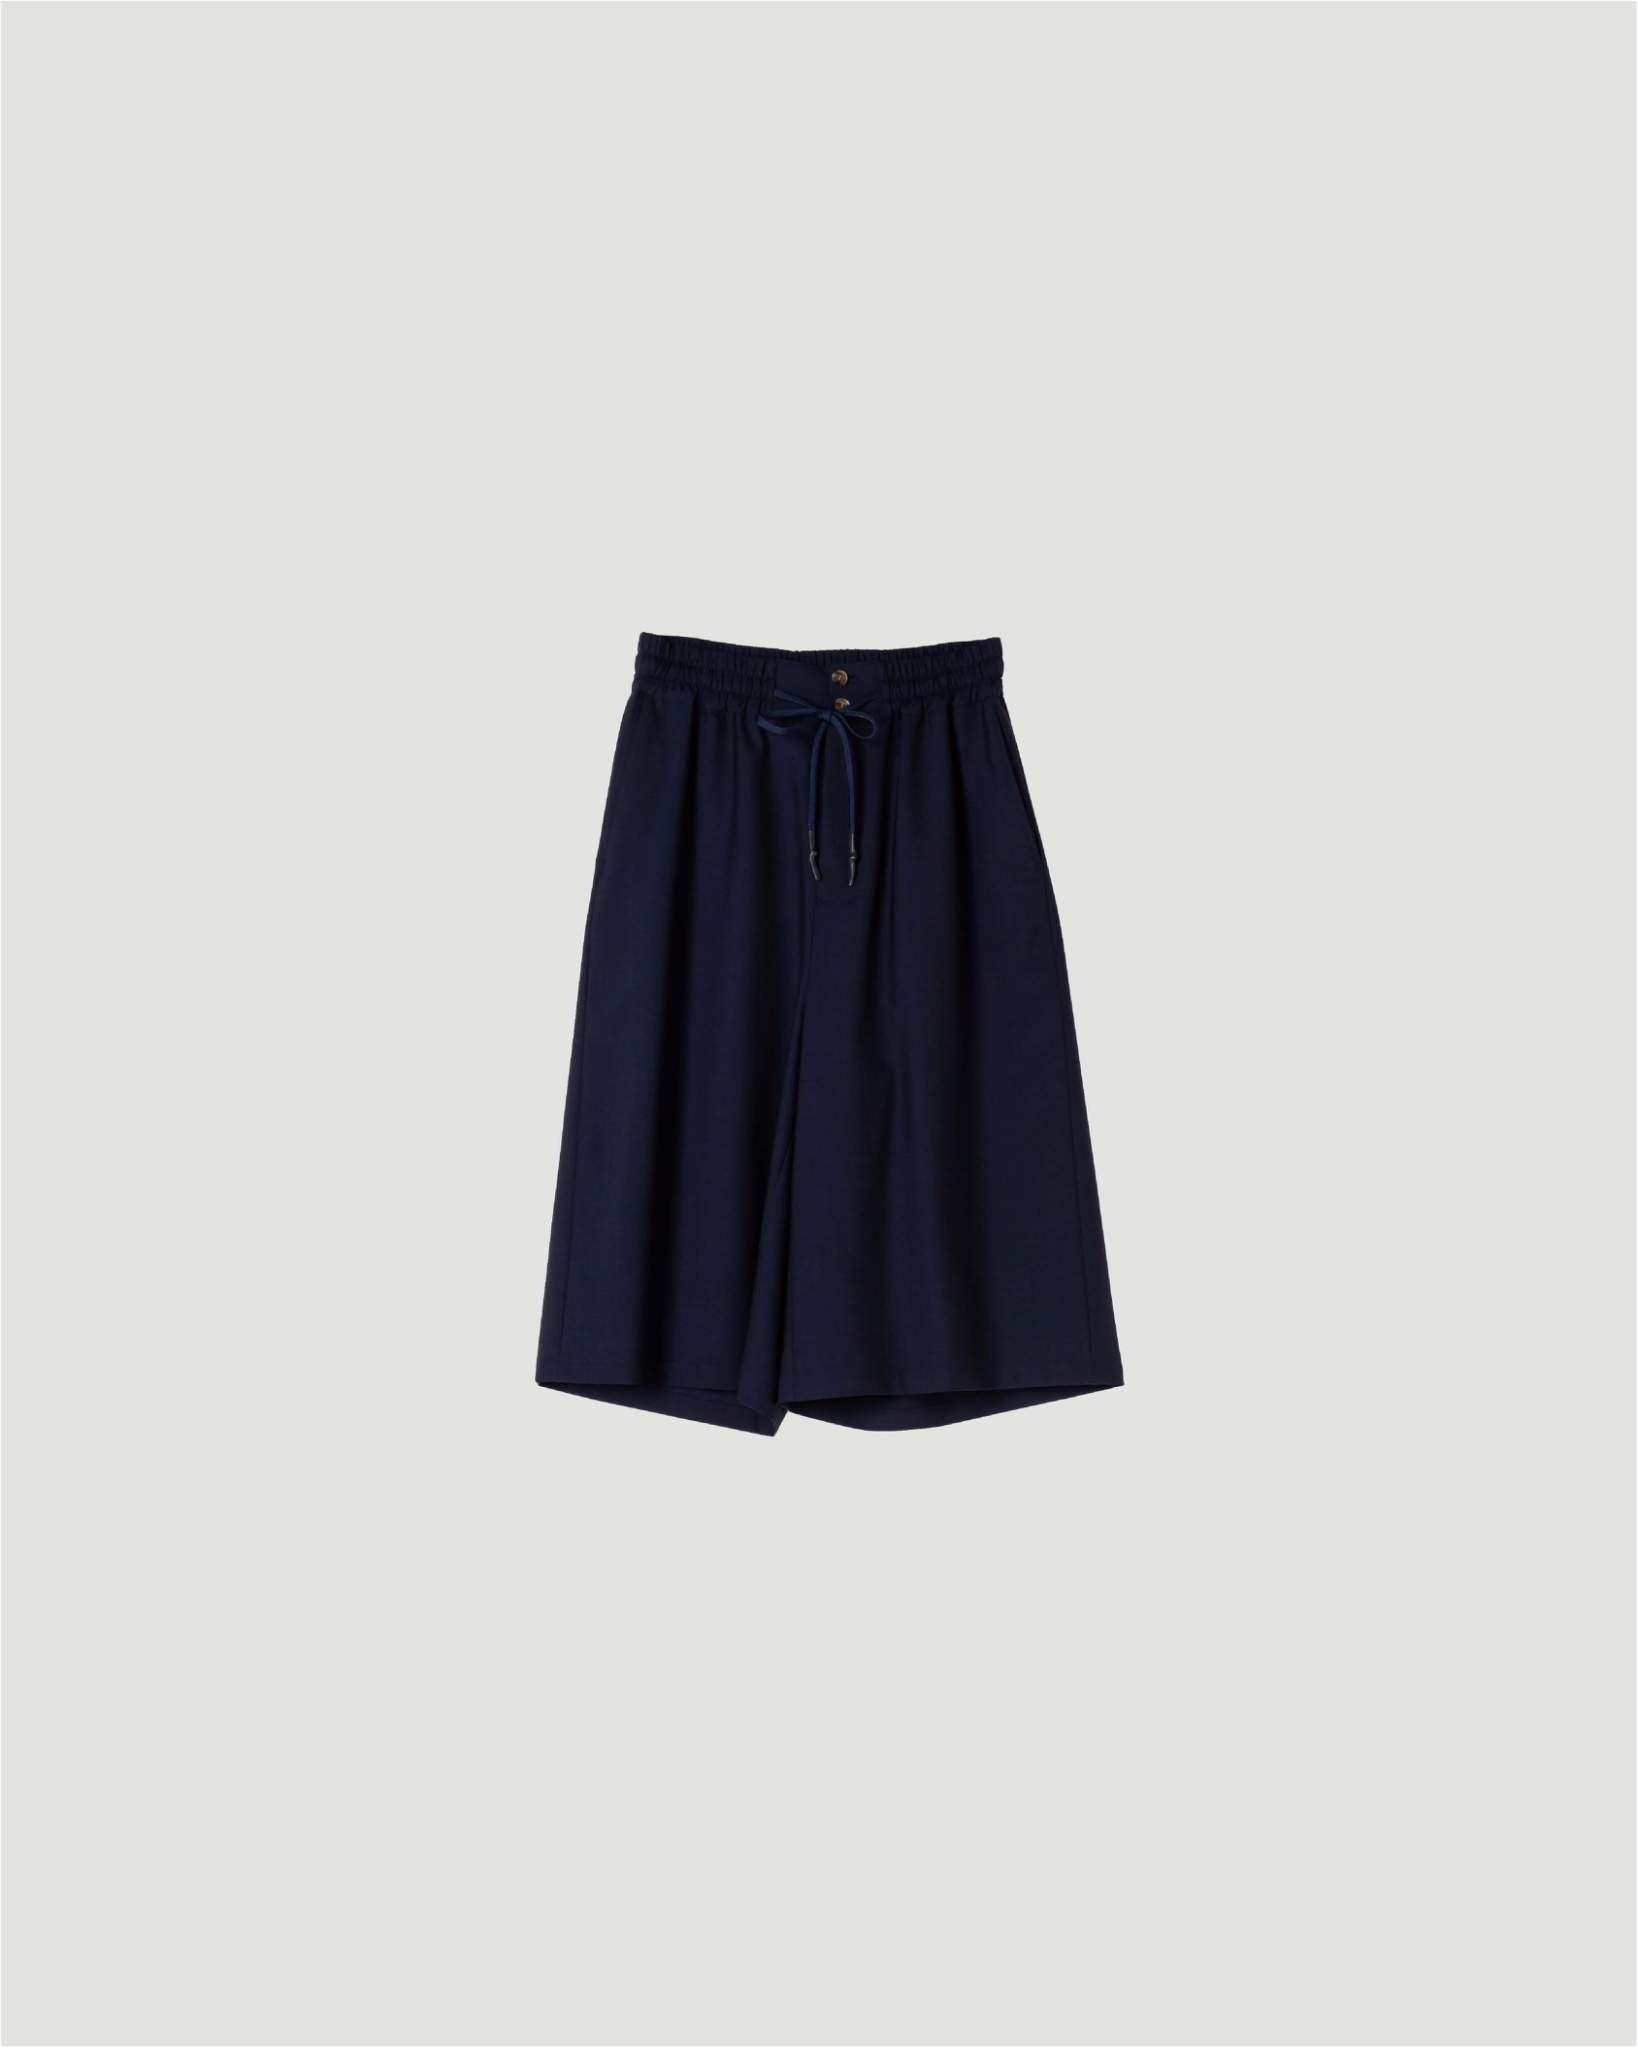 Super140 WOOL WIDE EASY 3/4 LENGTH SHORTS .06【NAVY】